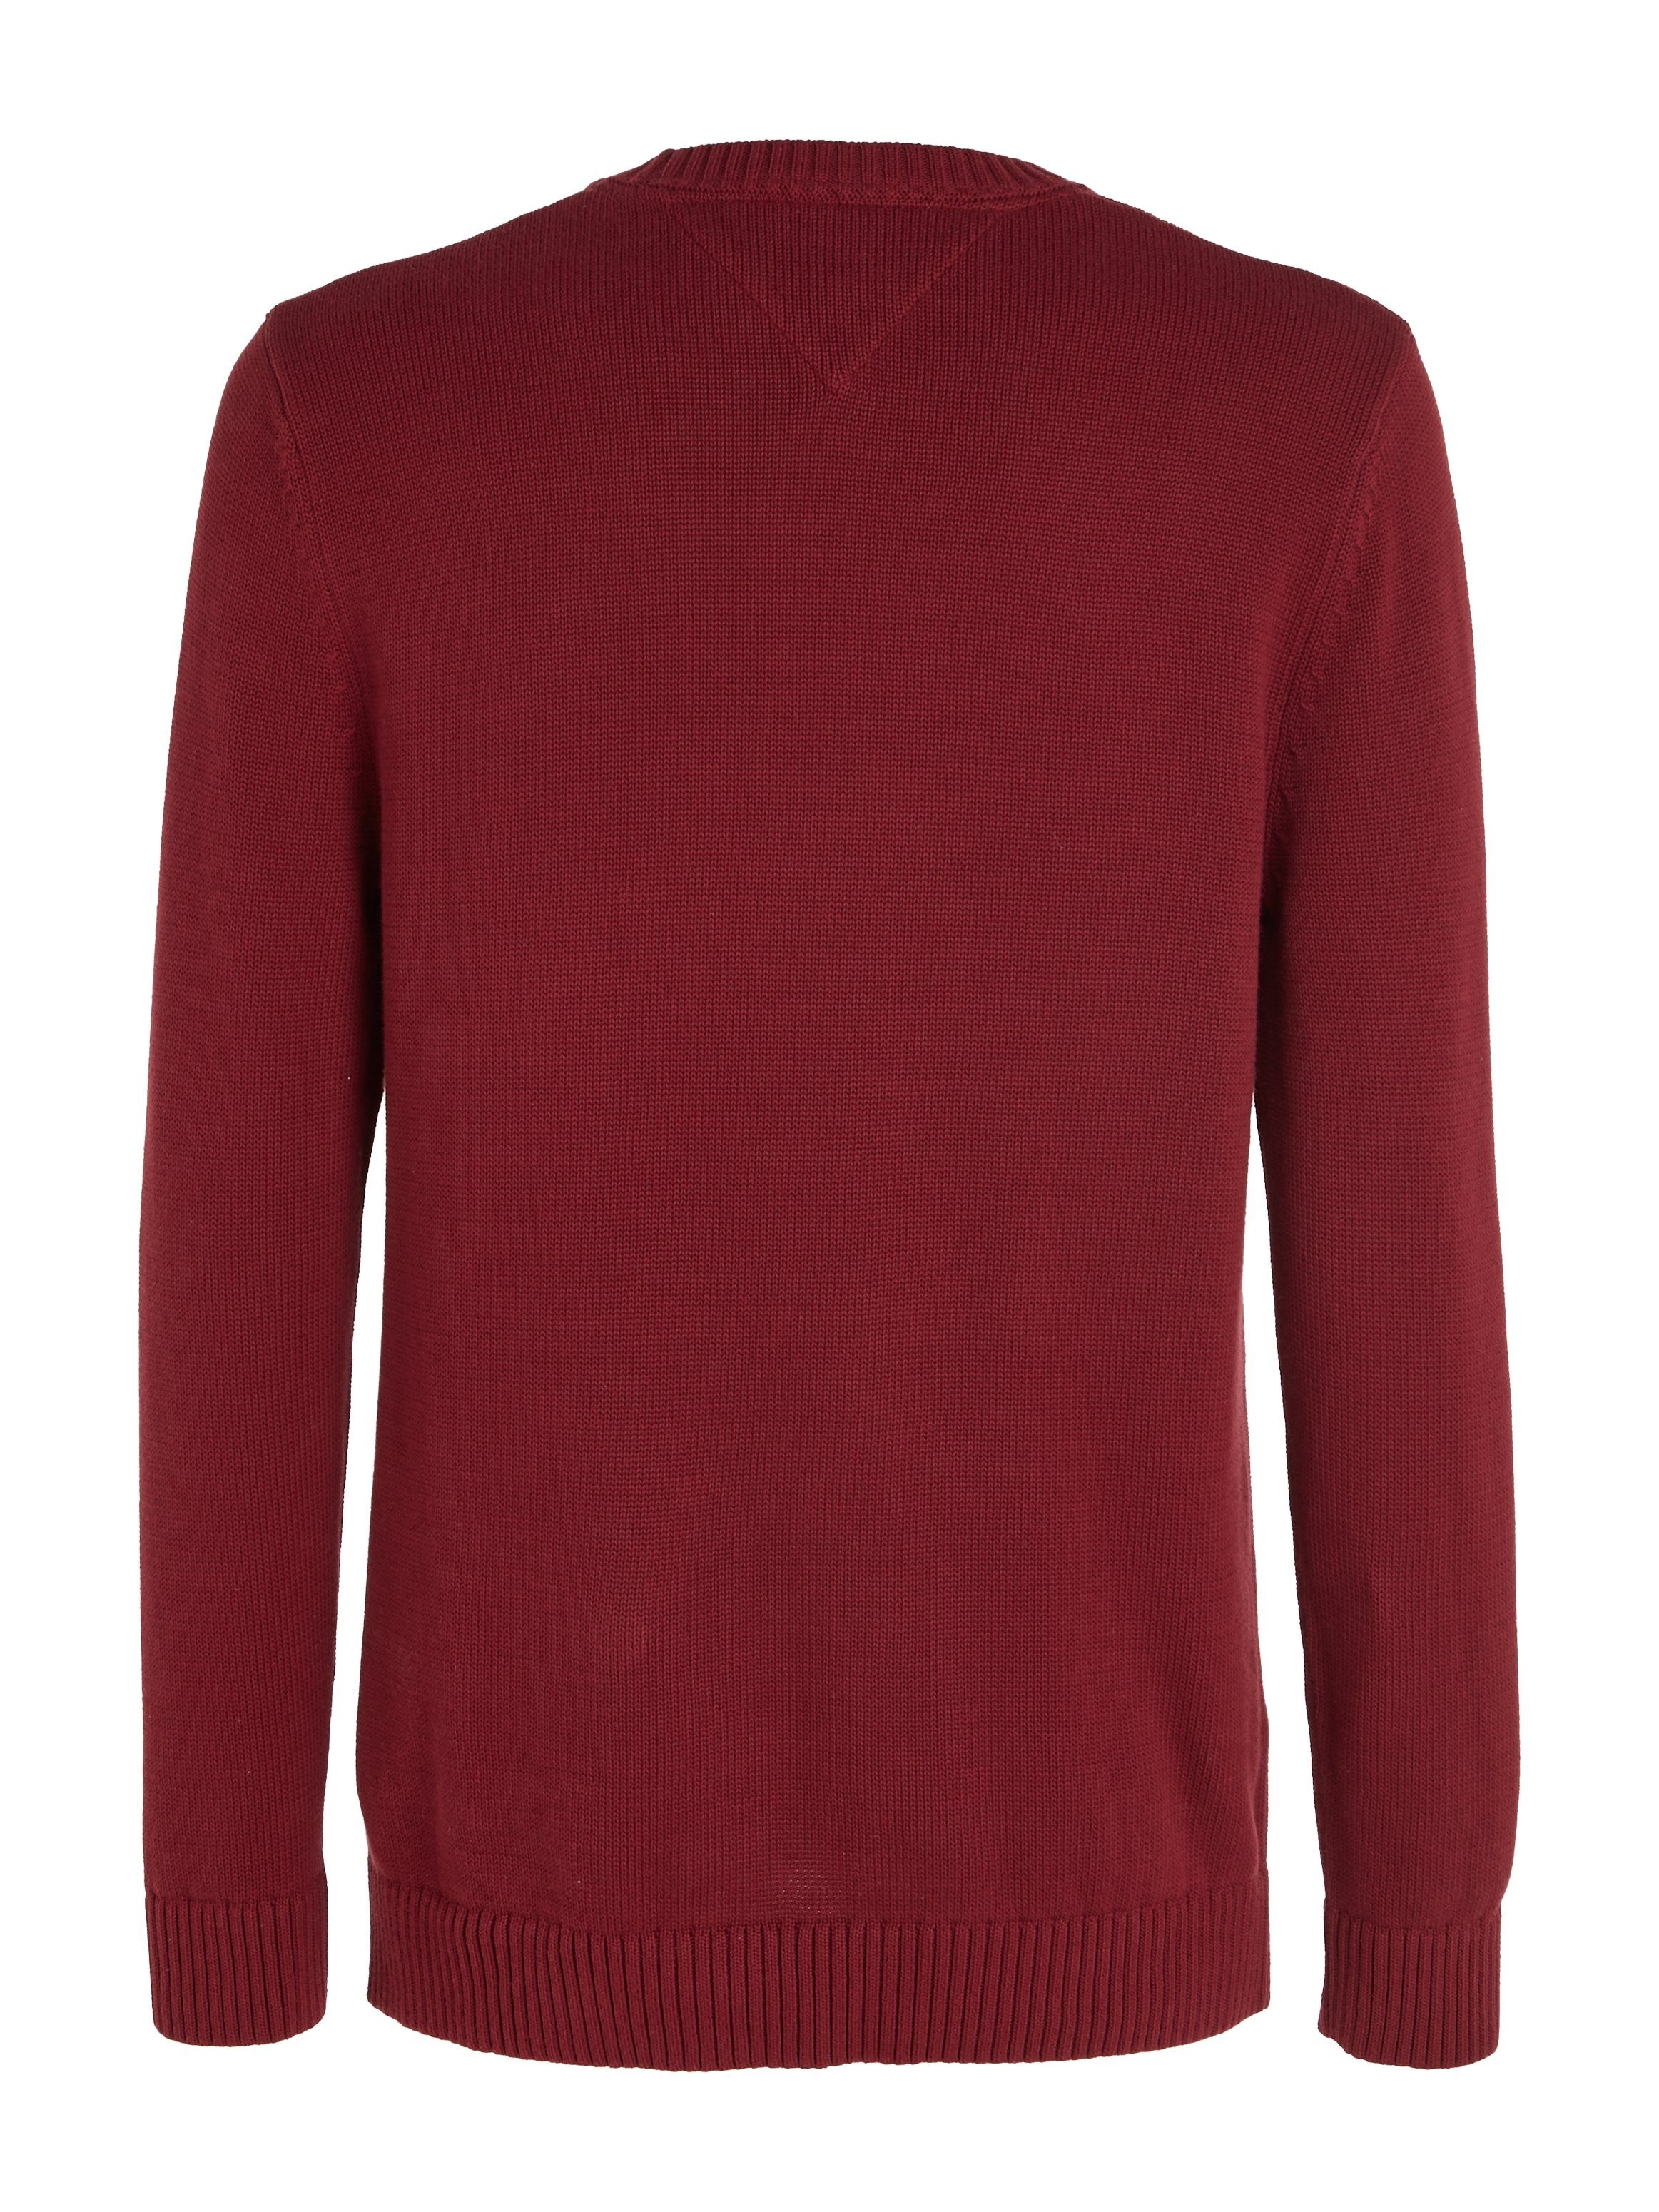 ESSENTIAL CREW Rouge SWEATER Strickpullover Jeans NECK Tommy TJM